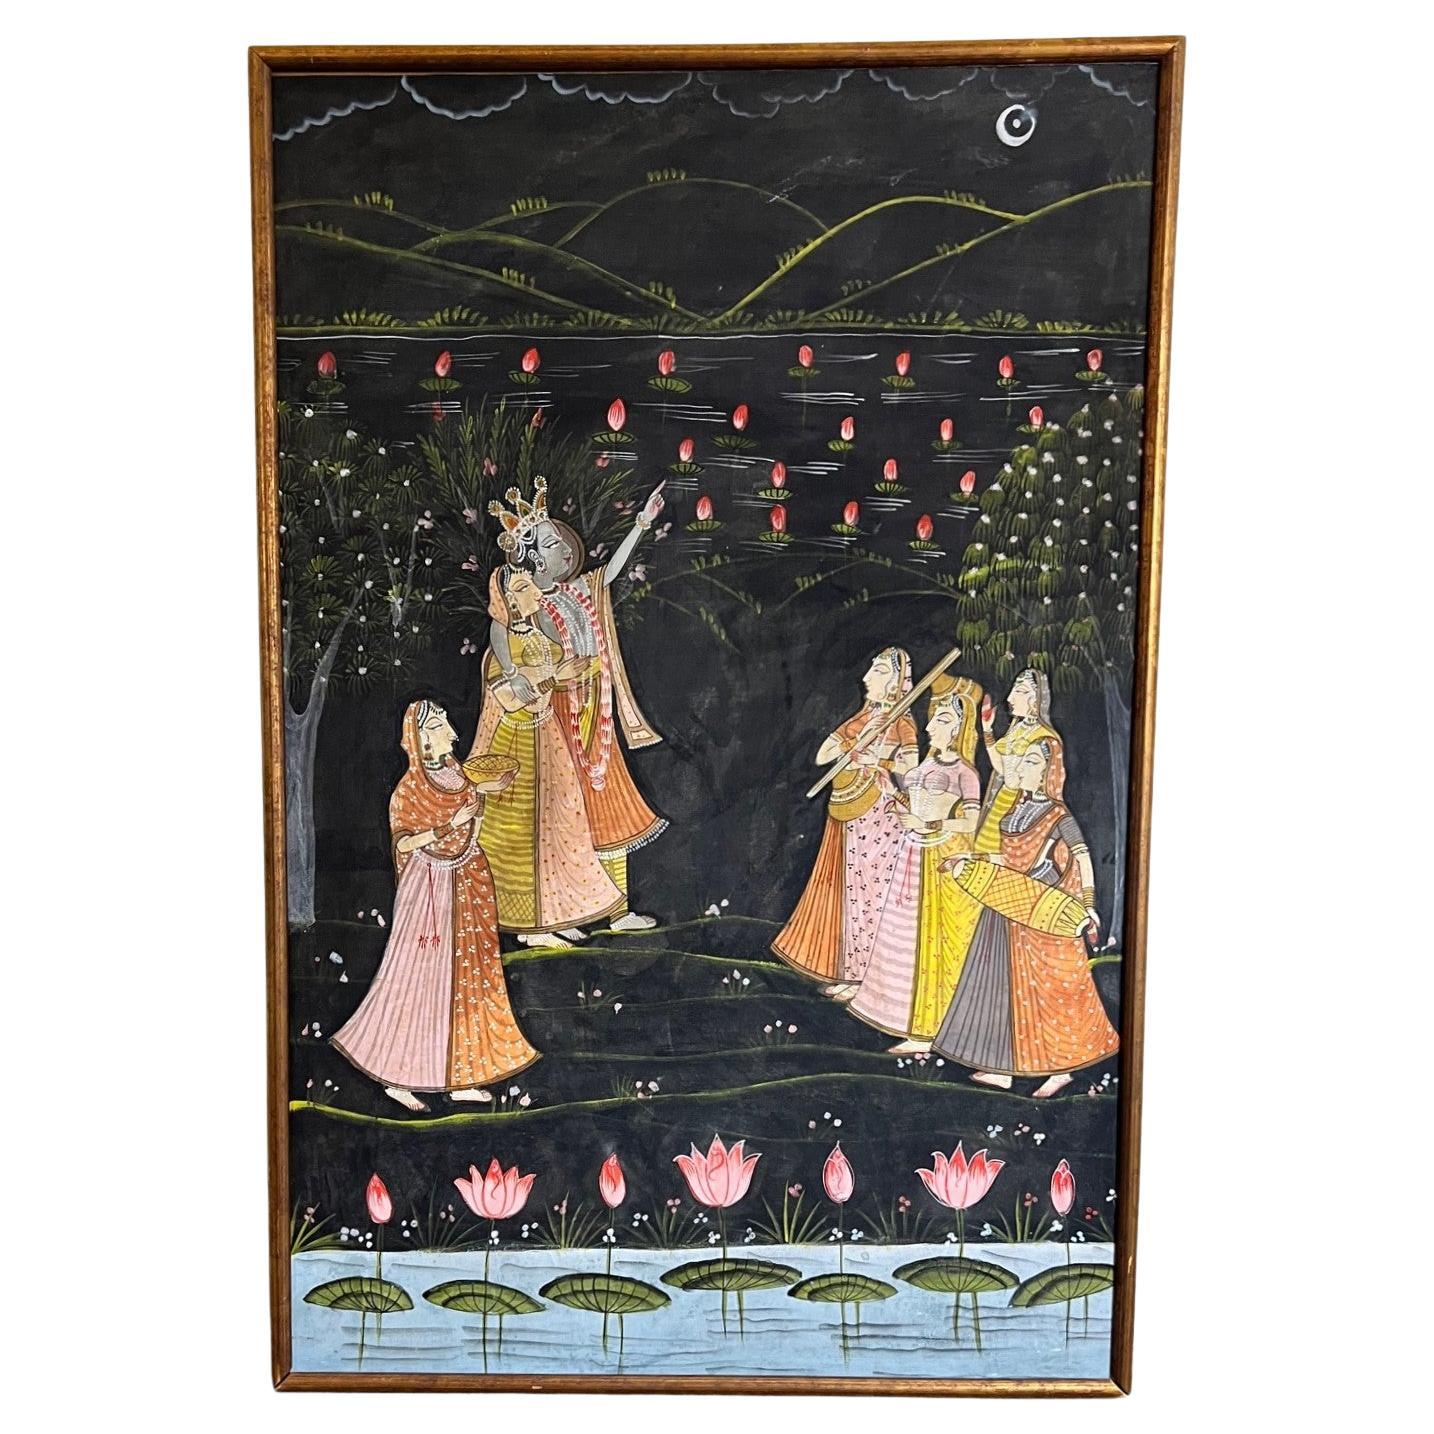 Large Vintage Framed Pichhavai Painting of Krishna, Radha and Gopis by Moonlight